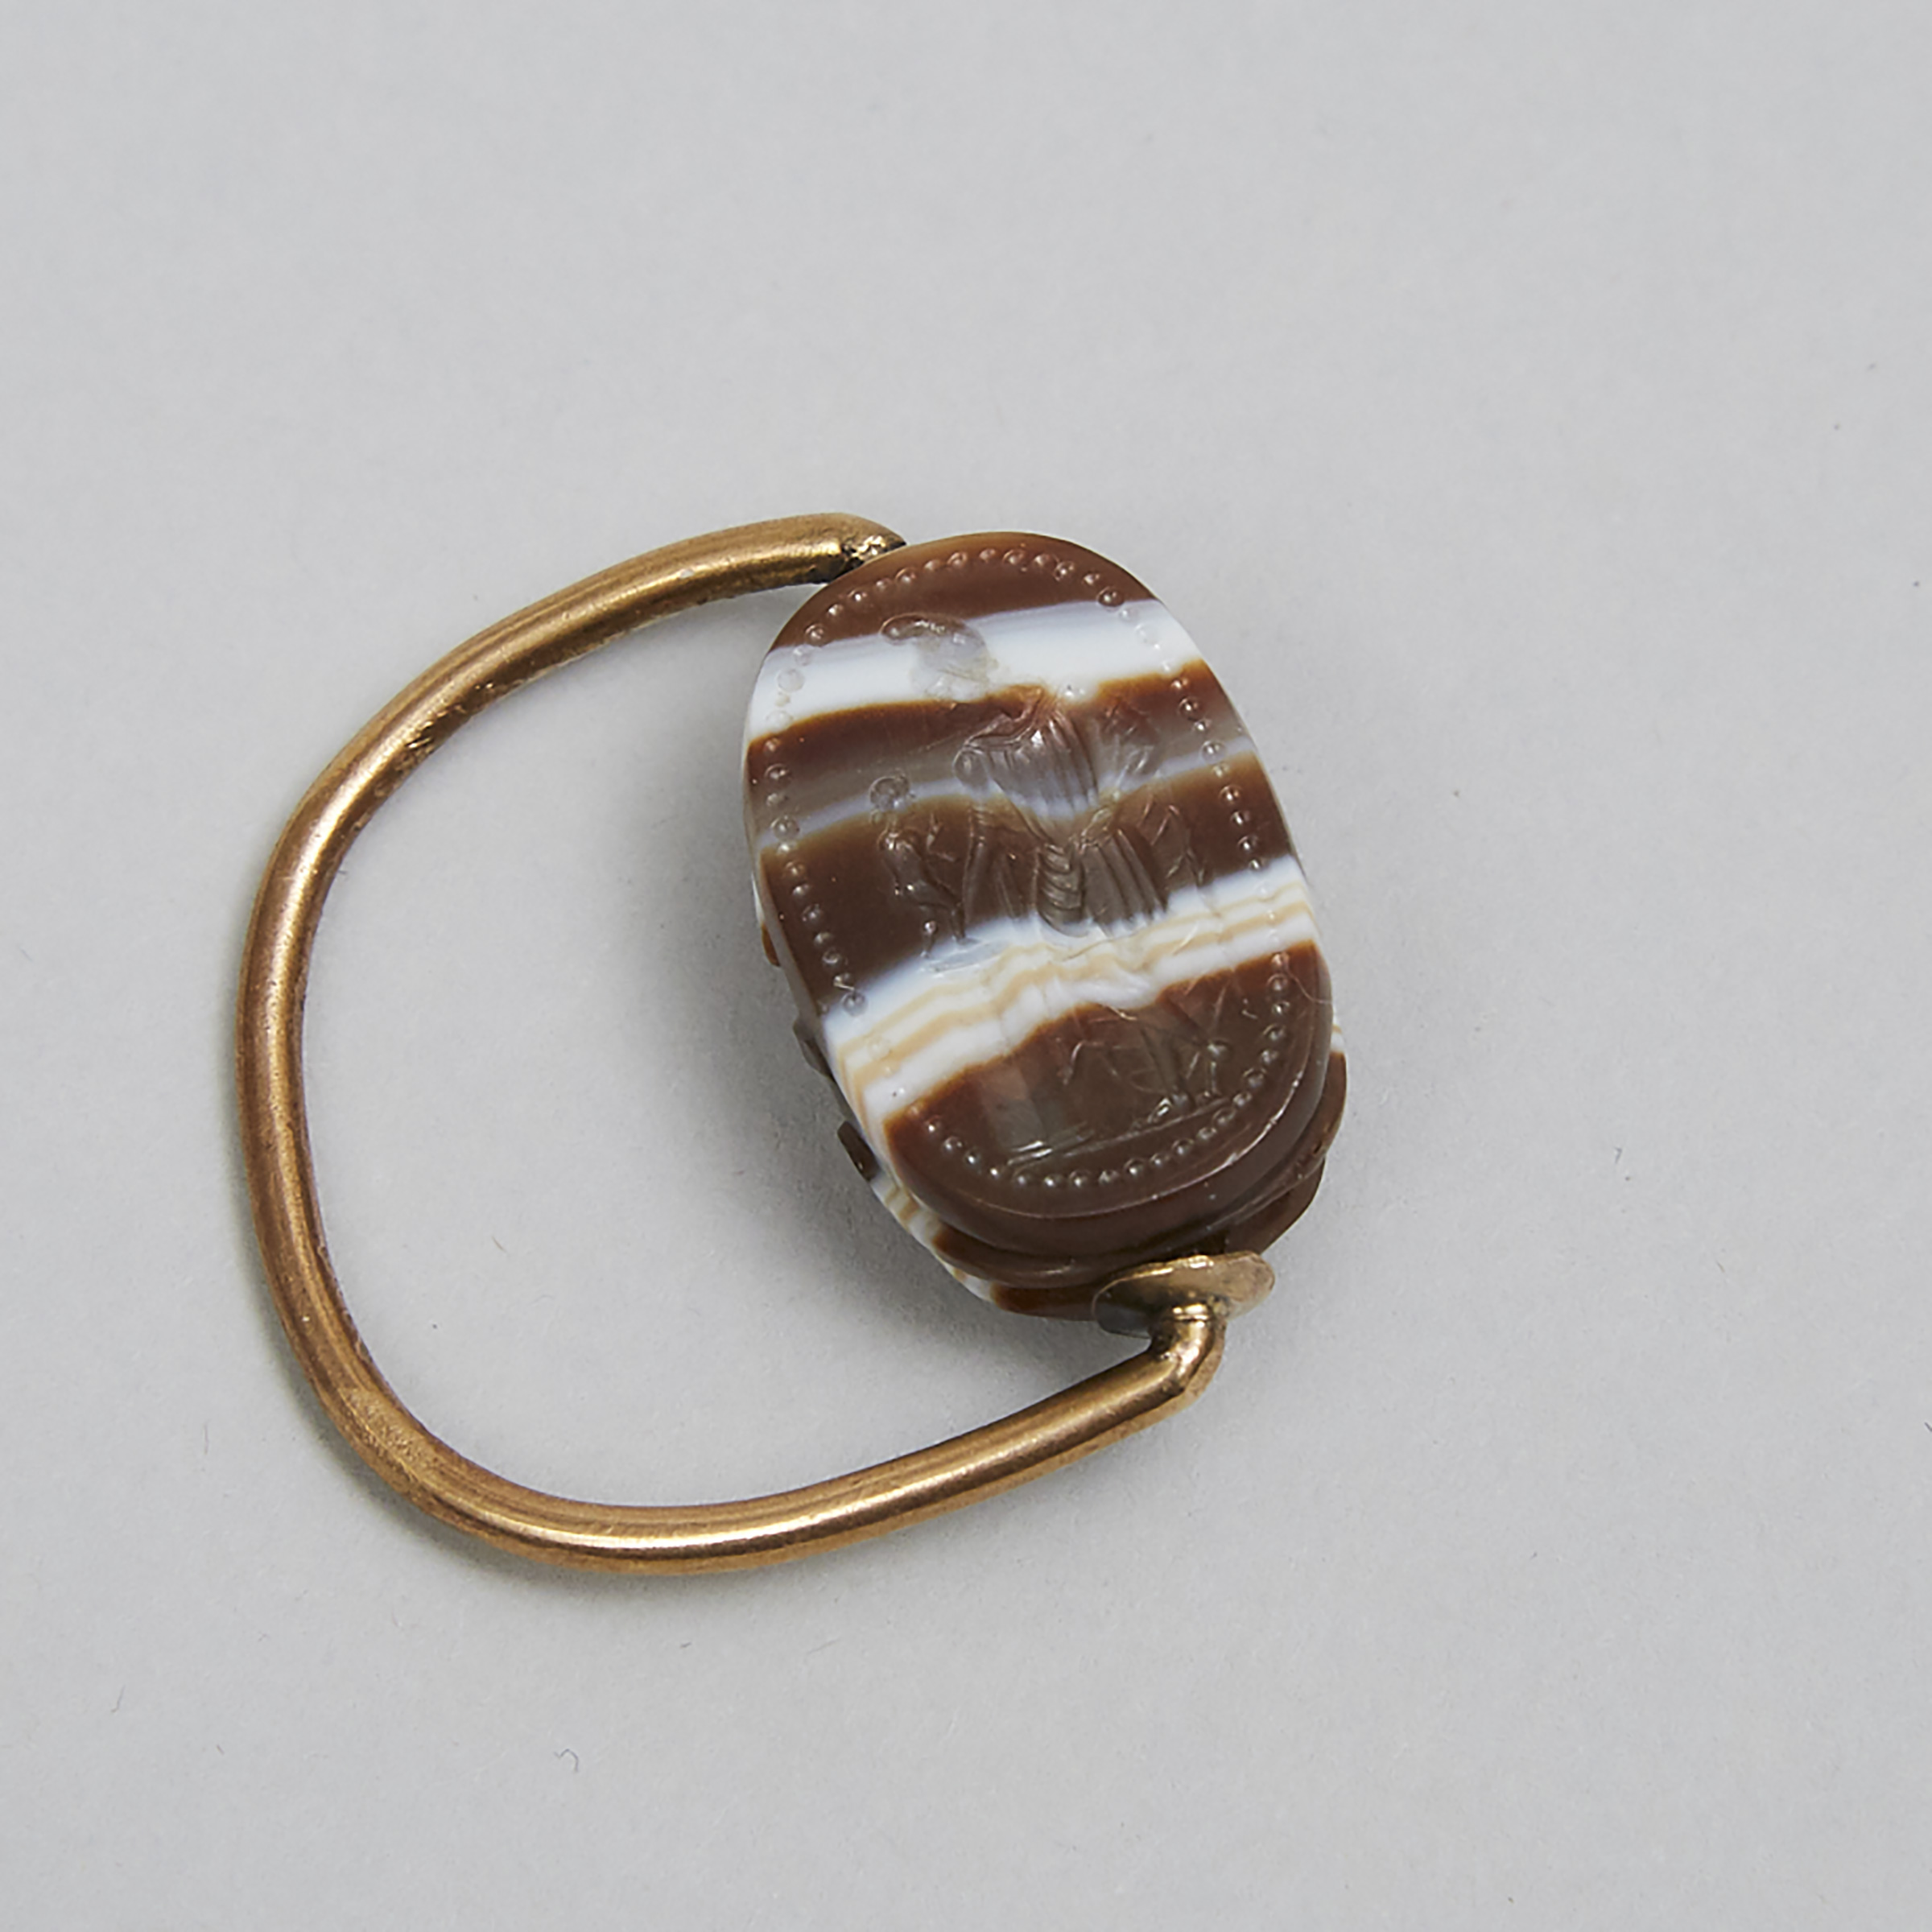 Etruscan Banded Agate Scaraboid Ring, 5th-4th century B.C.